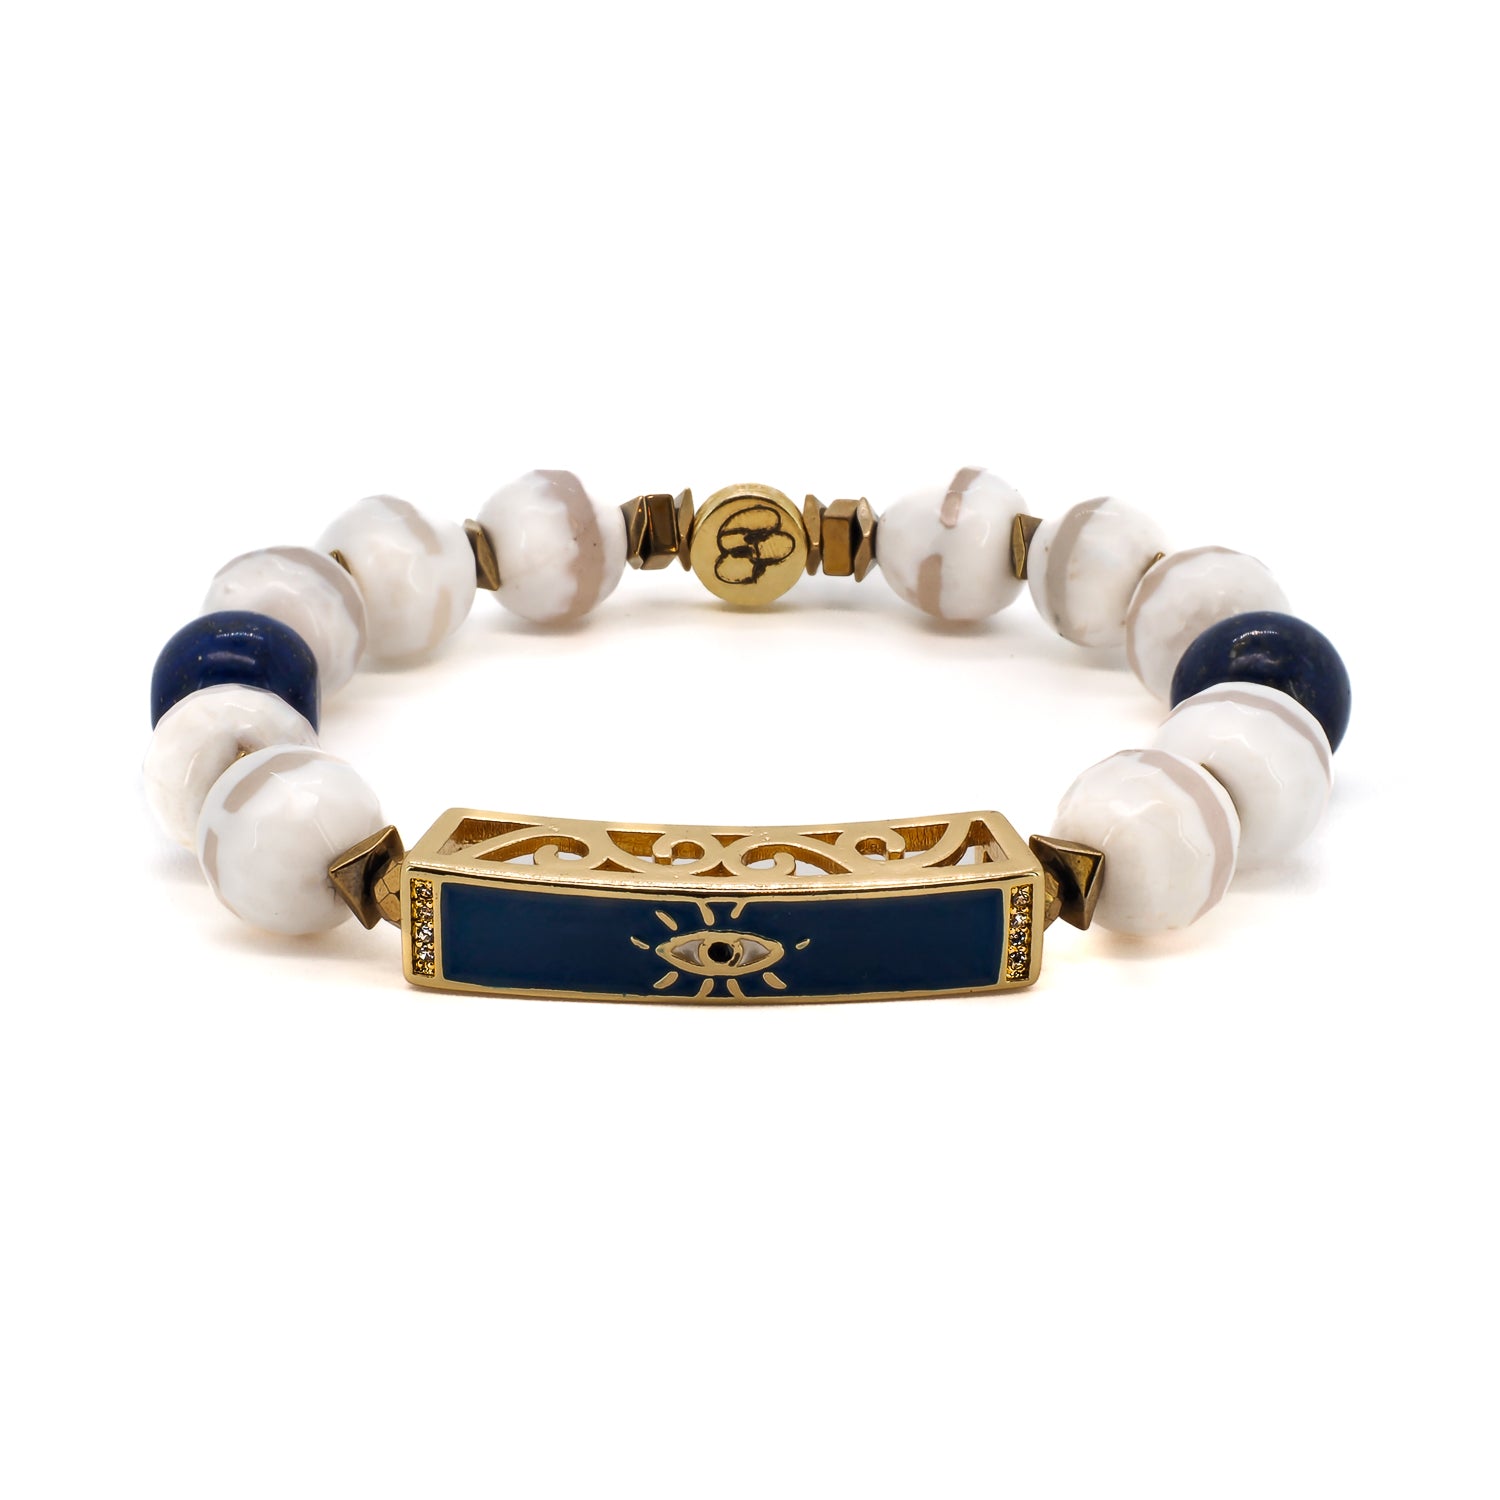 The Blue Amulet Bracelet, a stylish and protective accessory